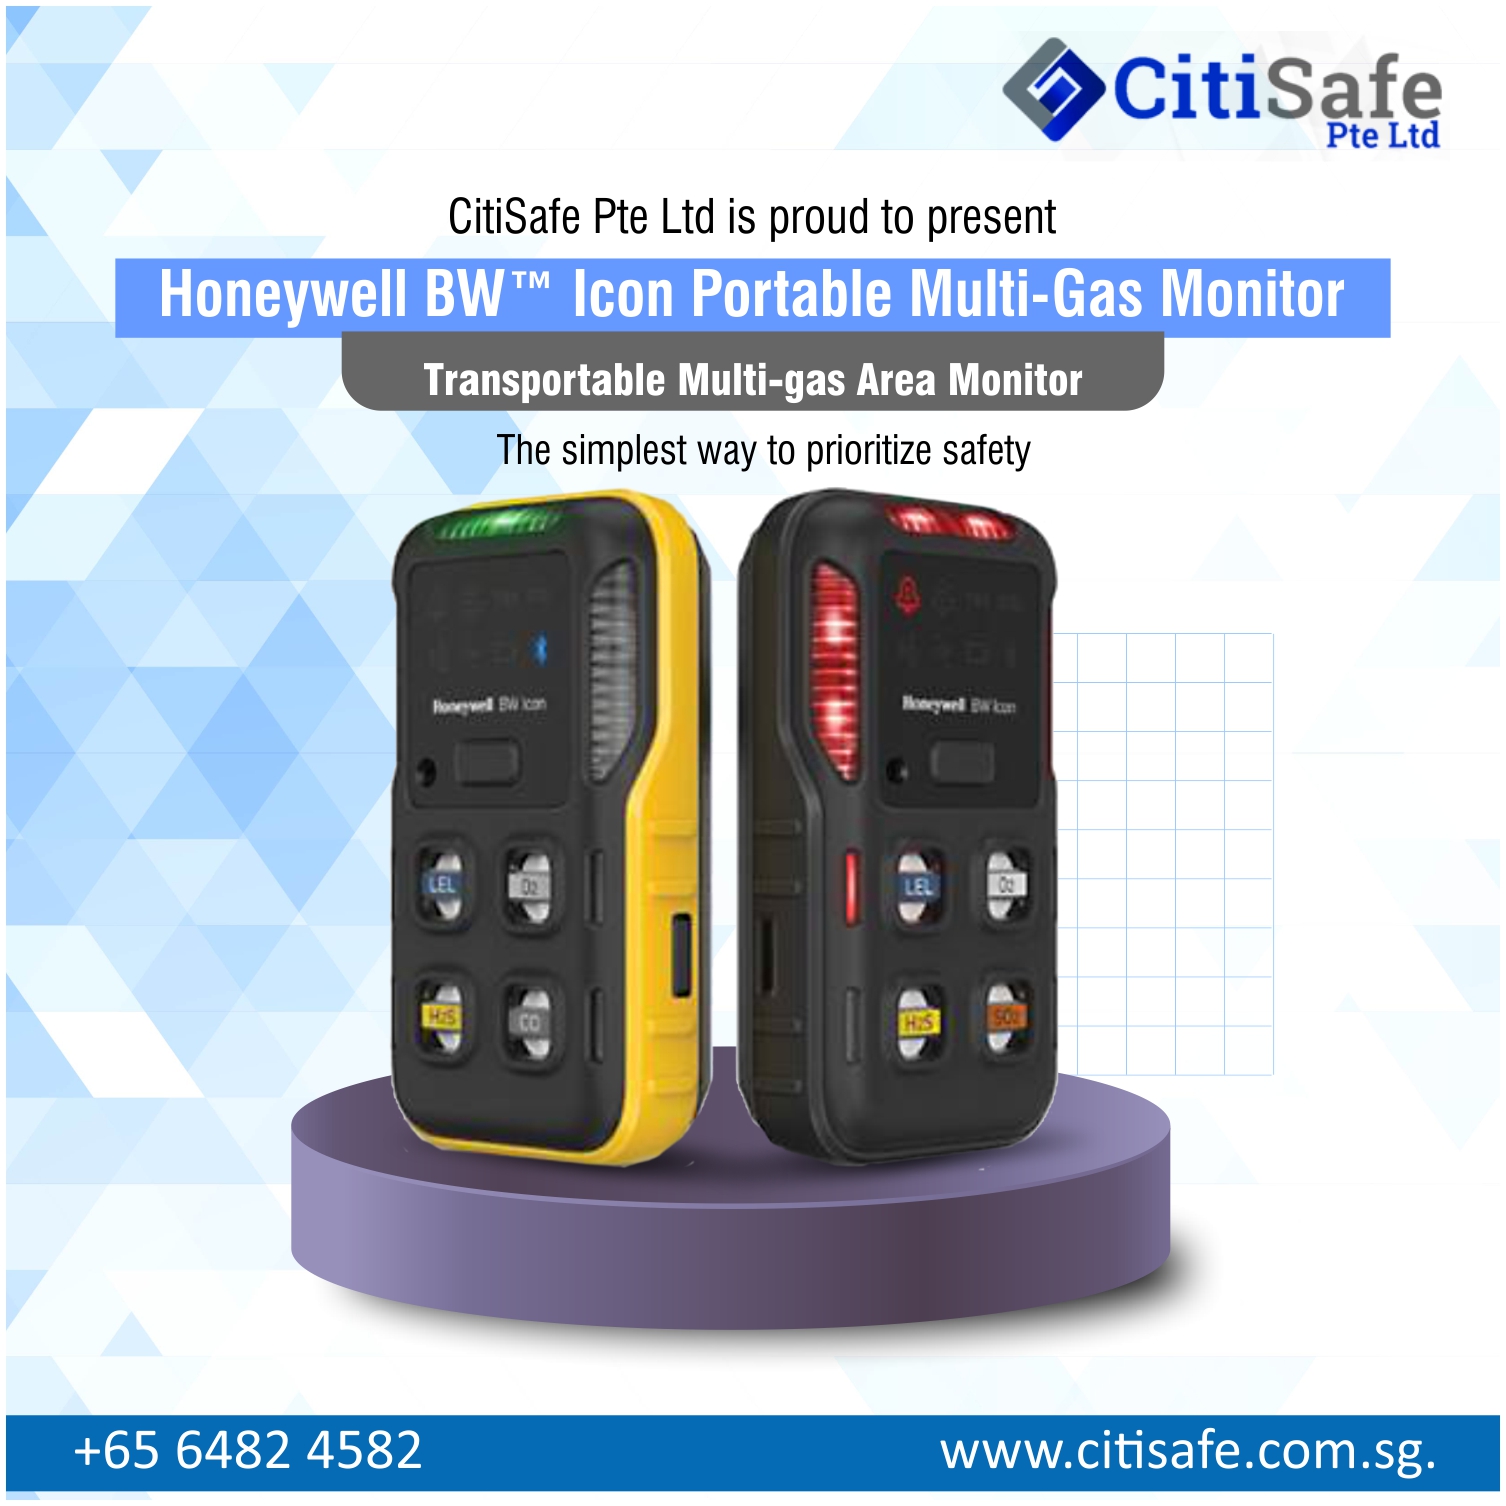 CitiSafe Pte Ltd Is Proud To Announce Our Newest Products From Heath Consultants Incorporated.